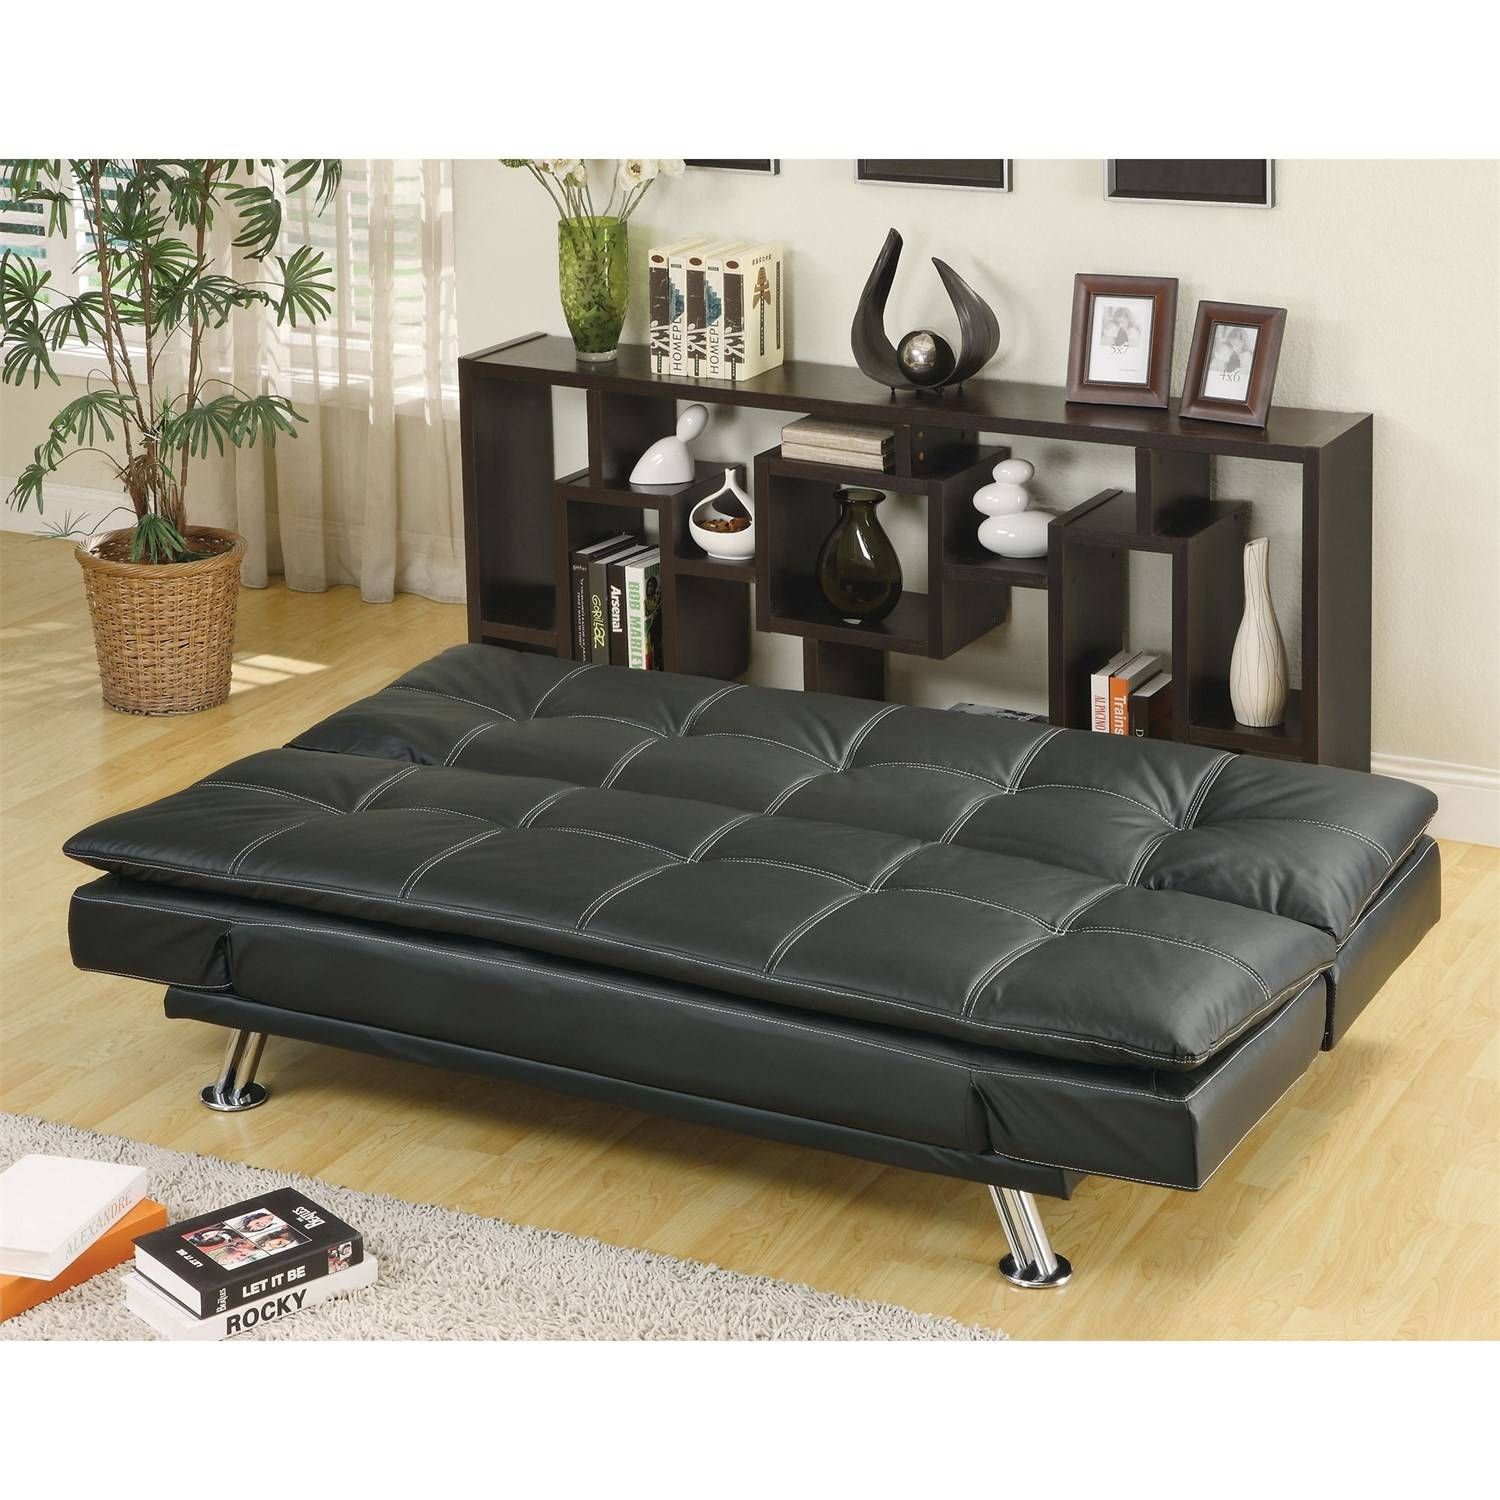 Coaster Furniture 300281 Contemporary Futon Sleeper Sofa Bed In For Coaster Futon Sofa Beds (View 4 of 15)